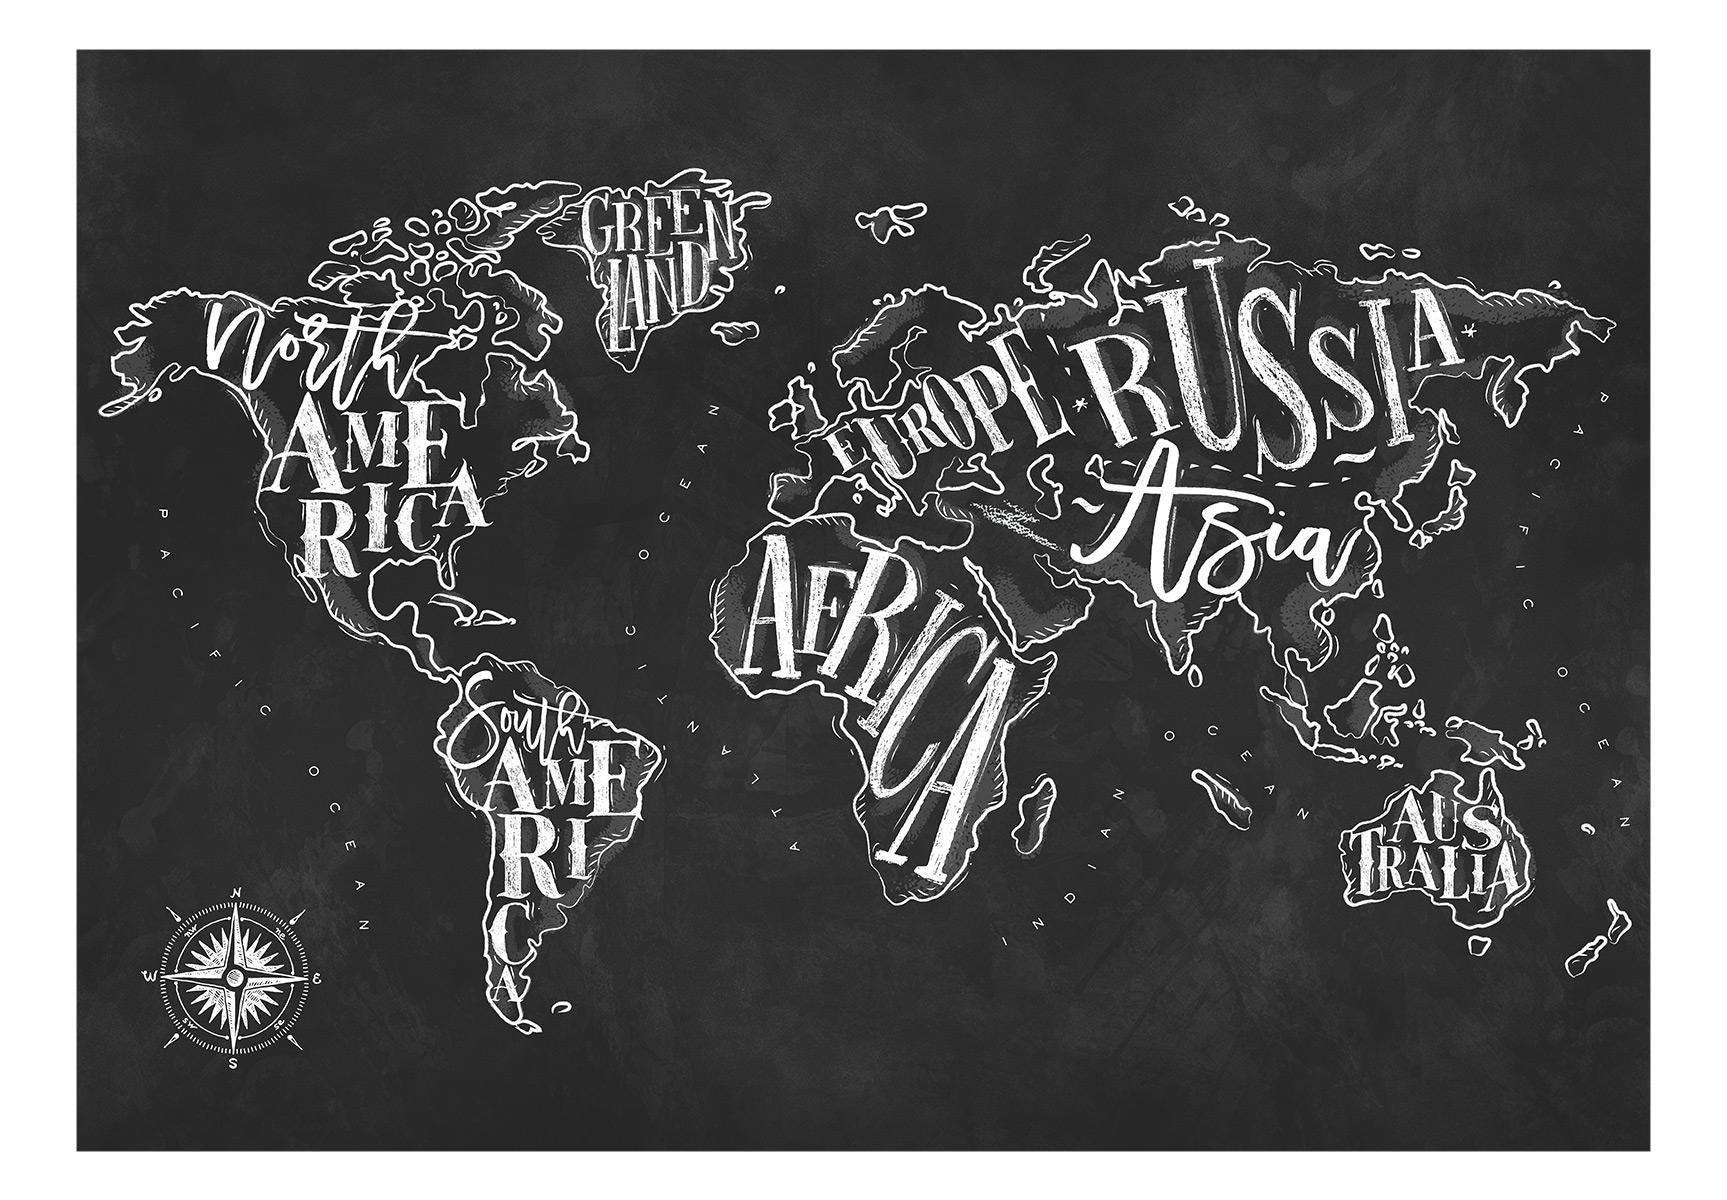 Peel and stick wall mural - Retro Continents (Black) - www.trendingbestsellers.com